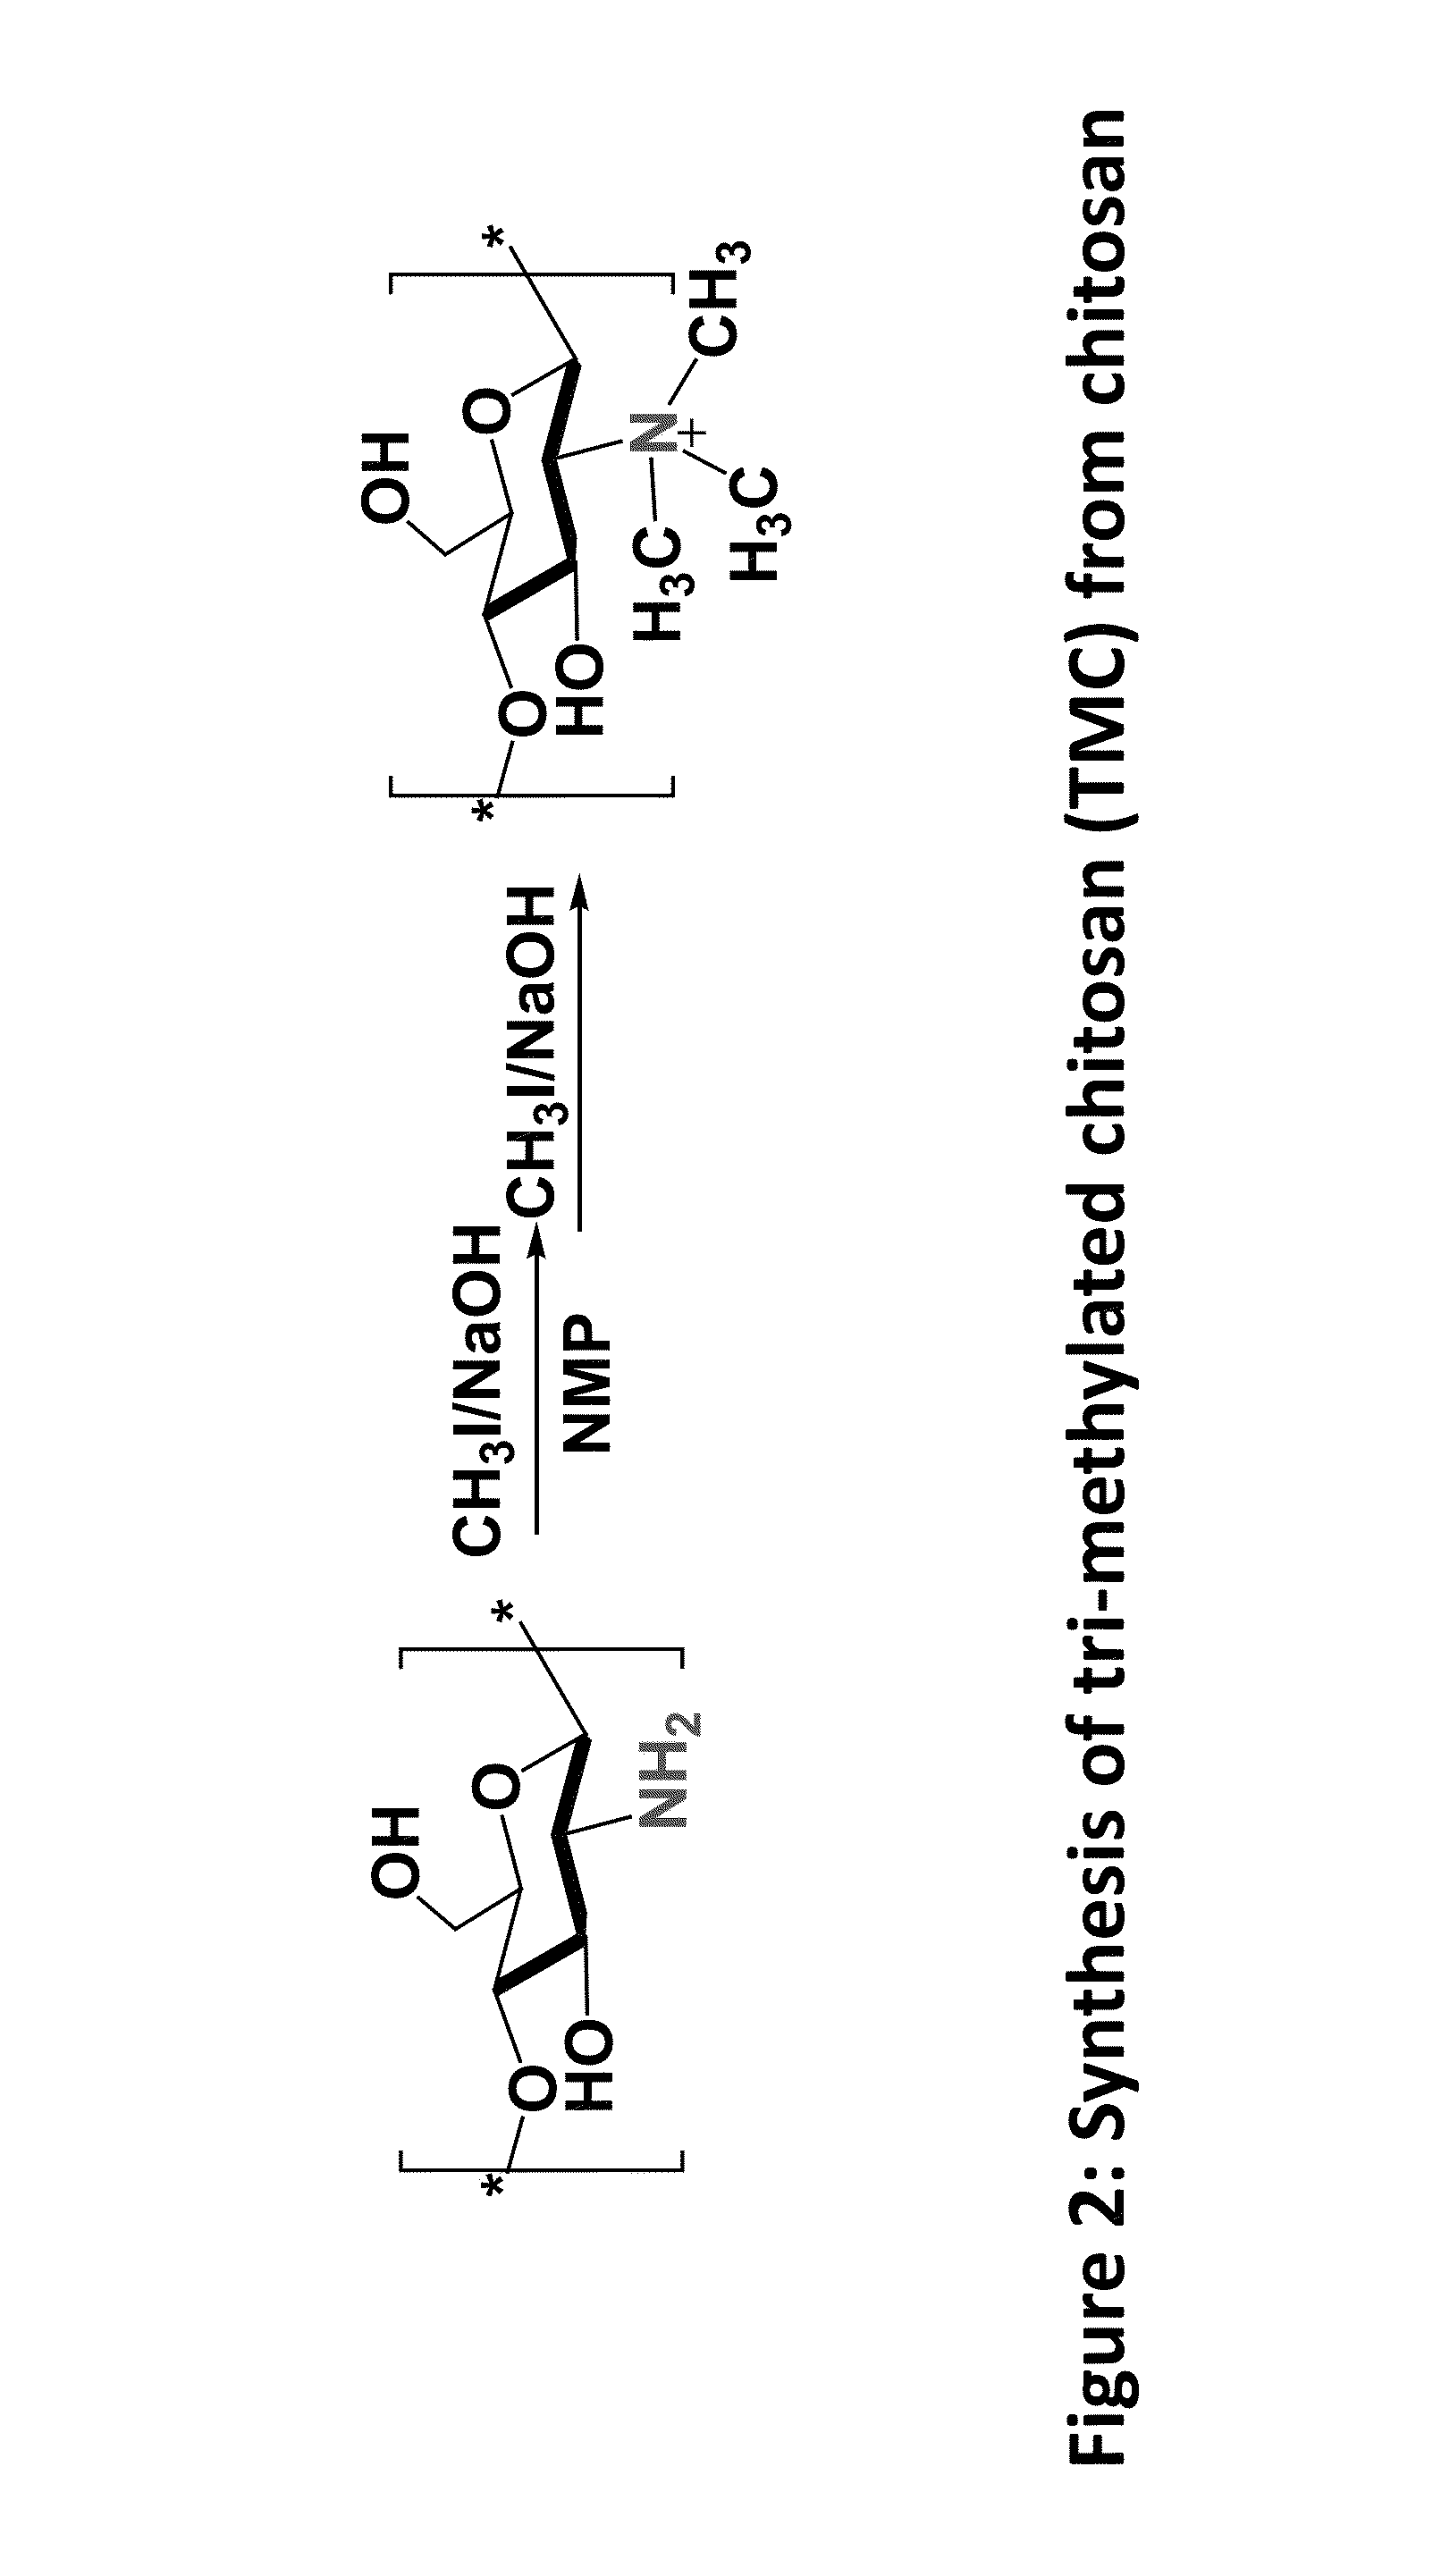 Compositions and method for Anti-sickling of red blood cells in sickle cell disease